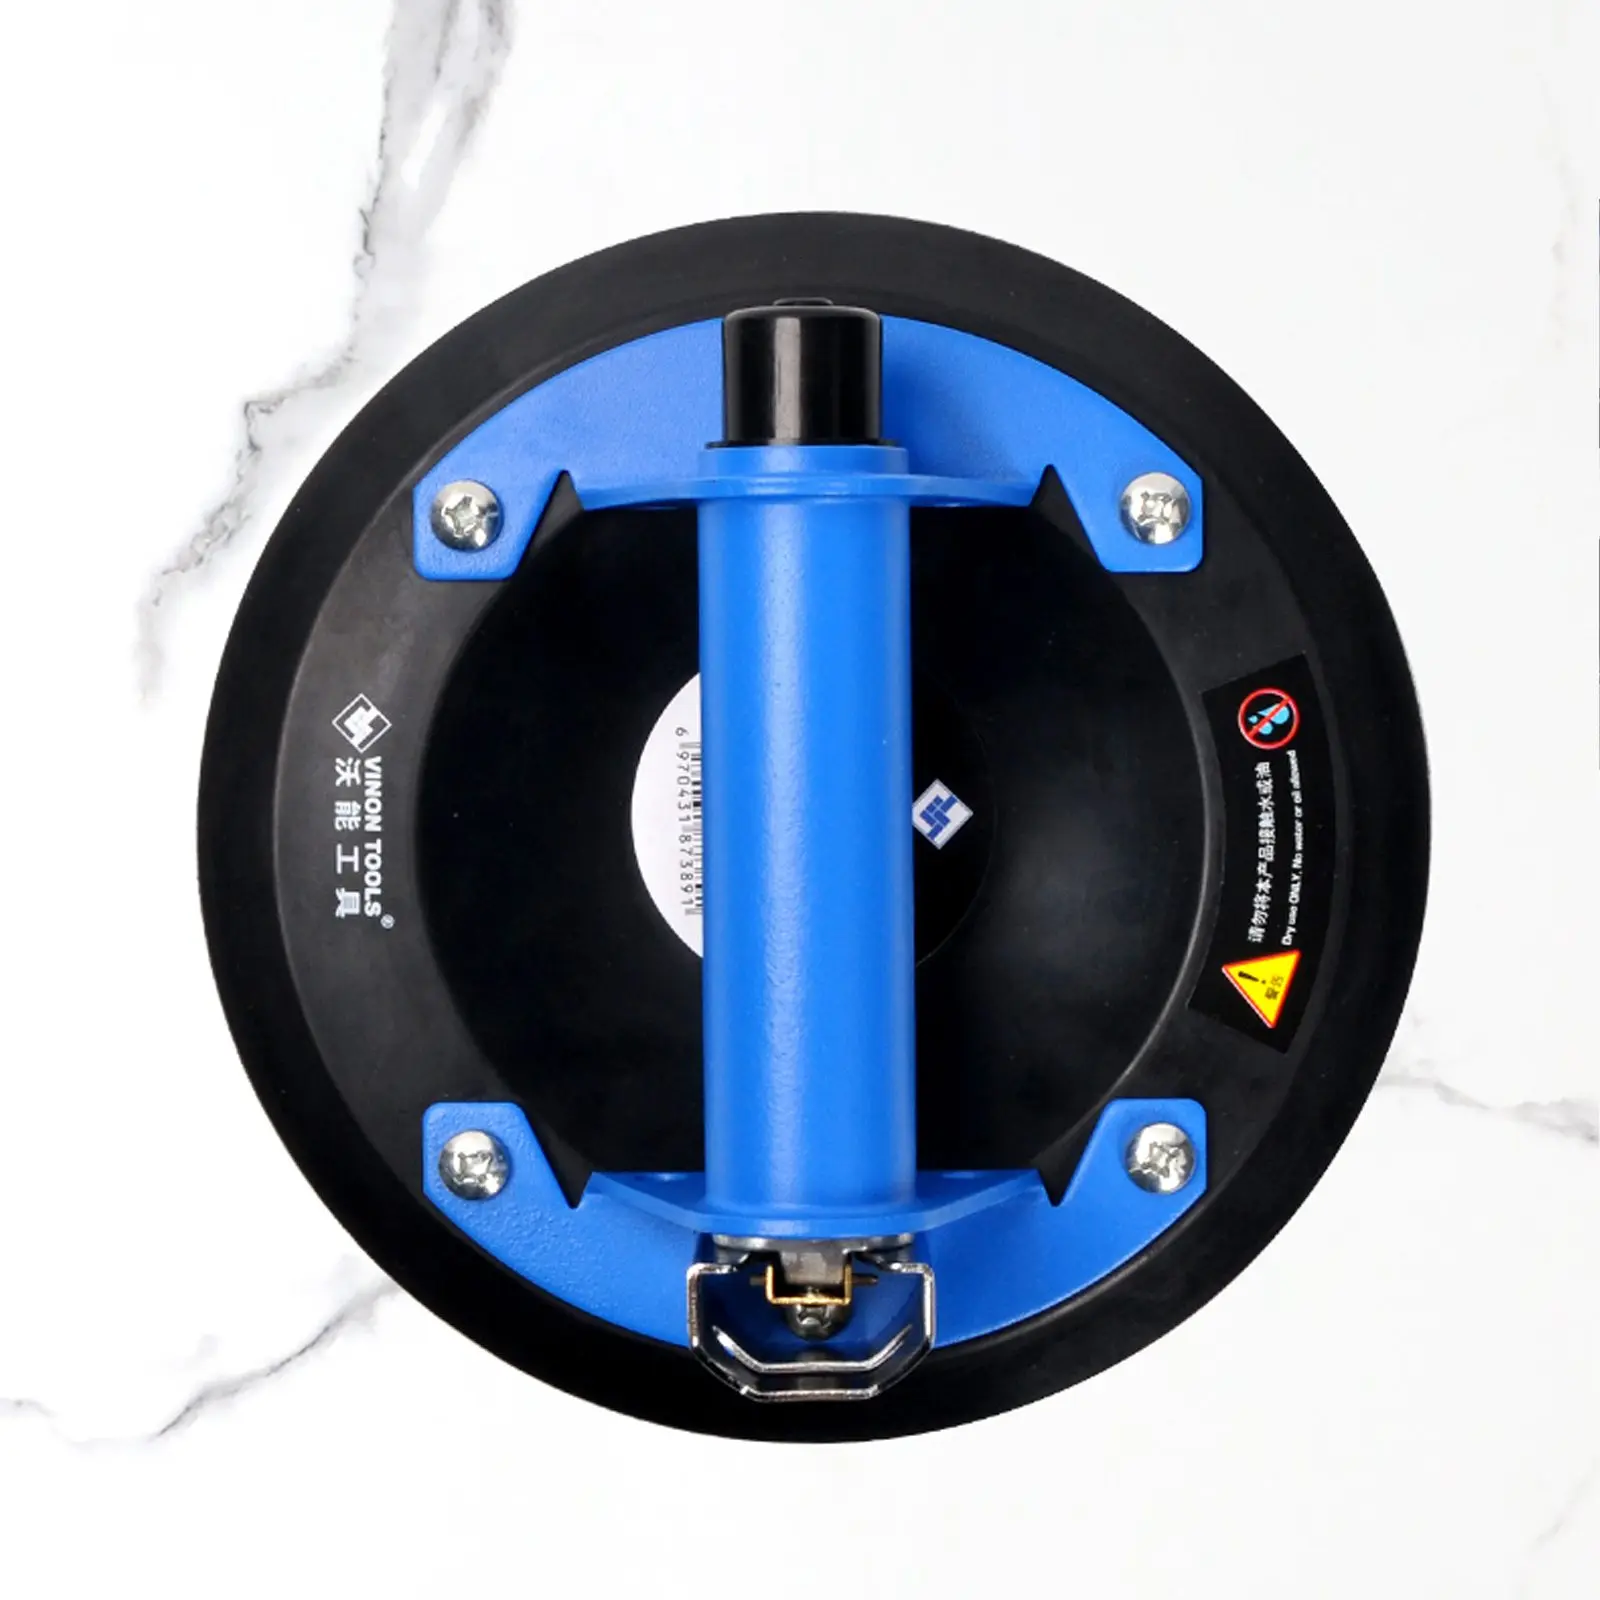 

6 Inch Vacuum Suction Cup Without Pressure Gauge Heavy Duty Lifter for Granite Tile Glass Manual Lifting Handling Tool Blue